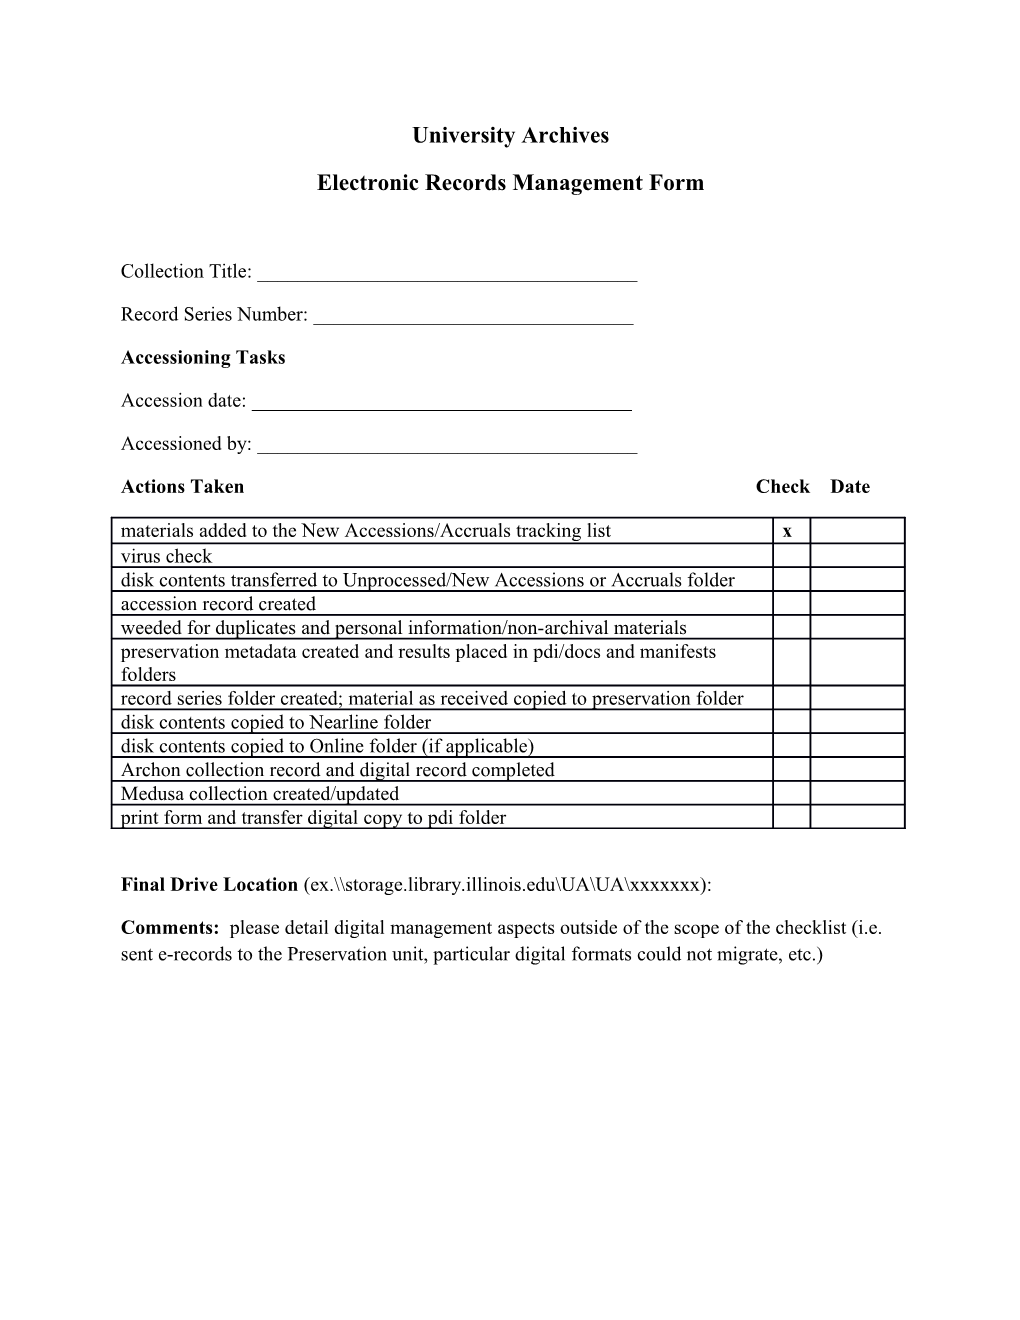 Electronic Records Management Form